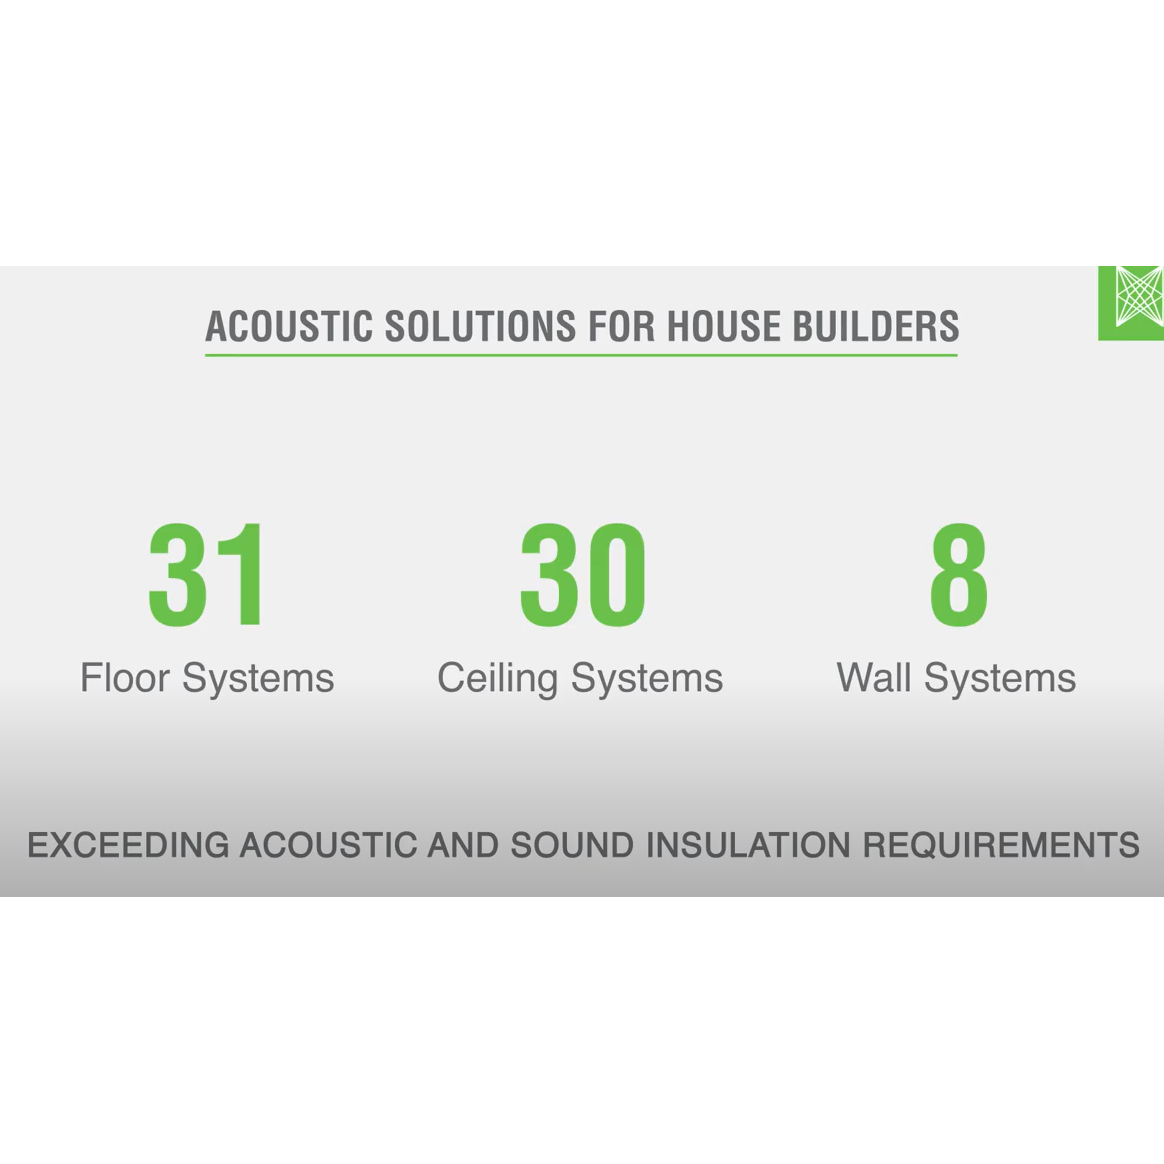 Acoustic insulation solutions for UK housebuilders that exceed minimum Building Regulations